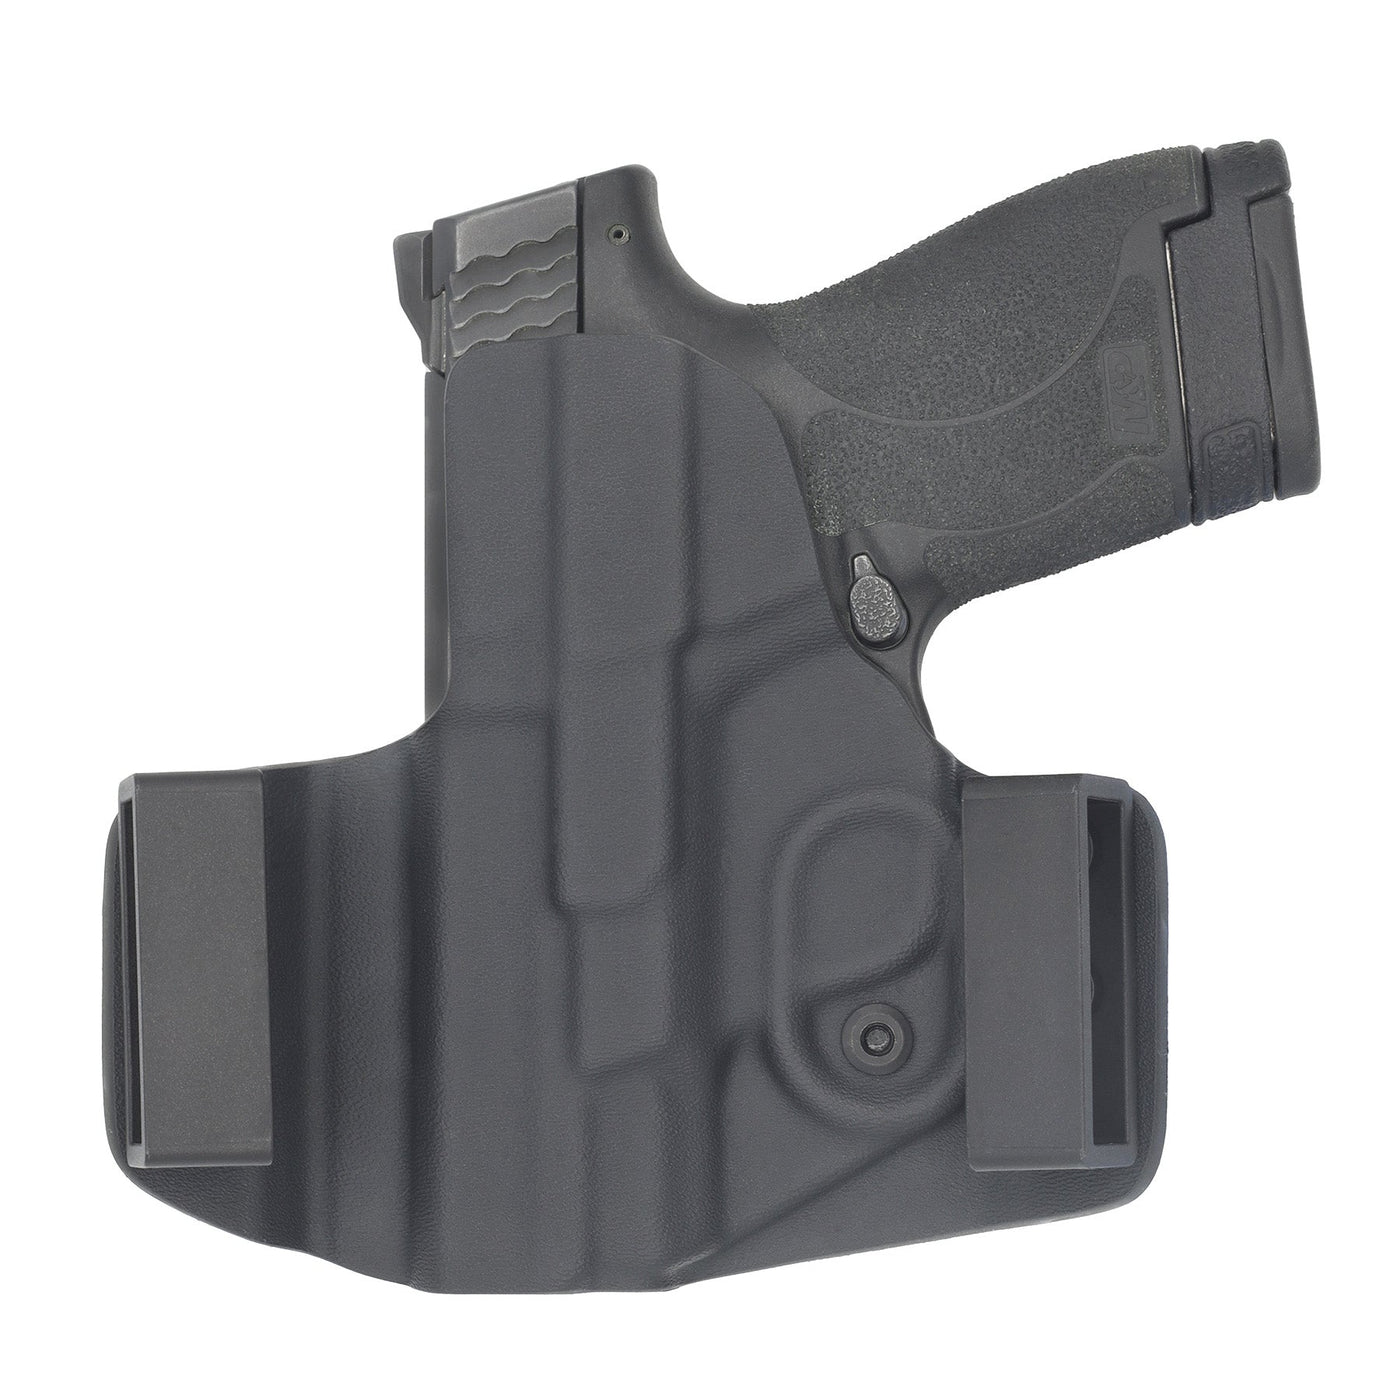 C&G Holsters Covert OWB kydex holster for Smith & Wesson M&P Shield 9/40 in black rear view